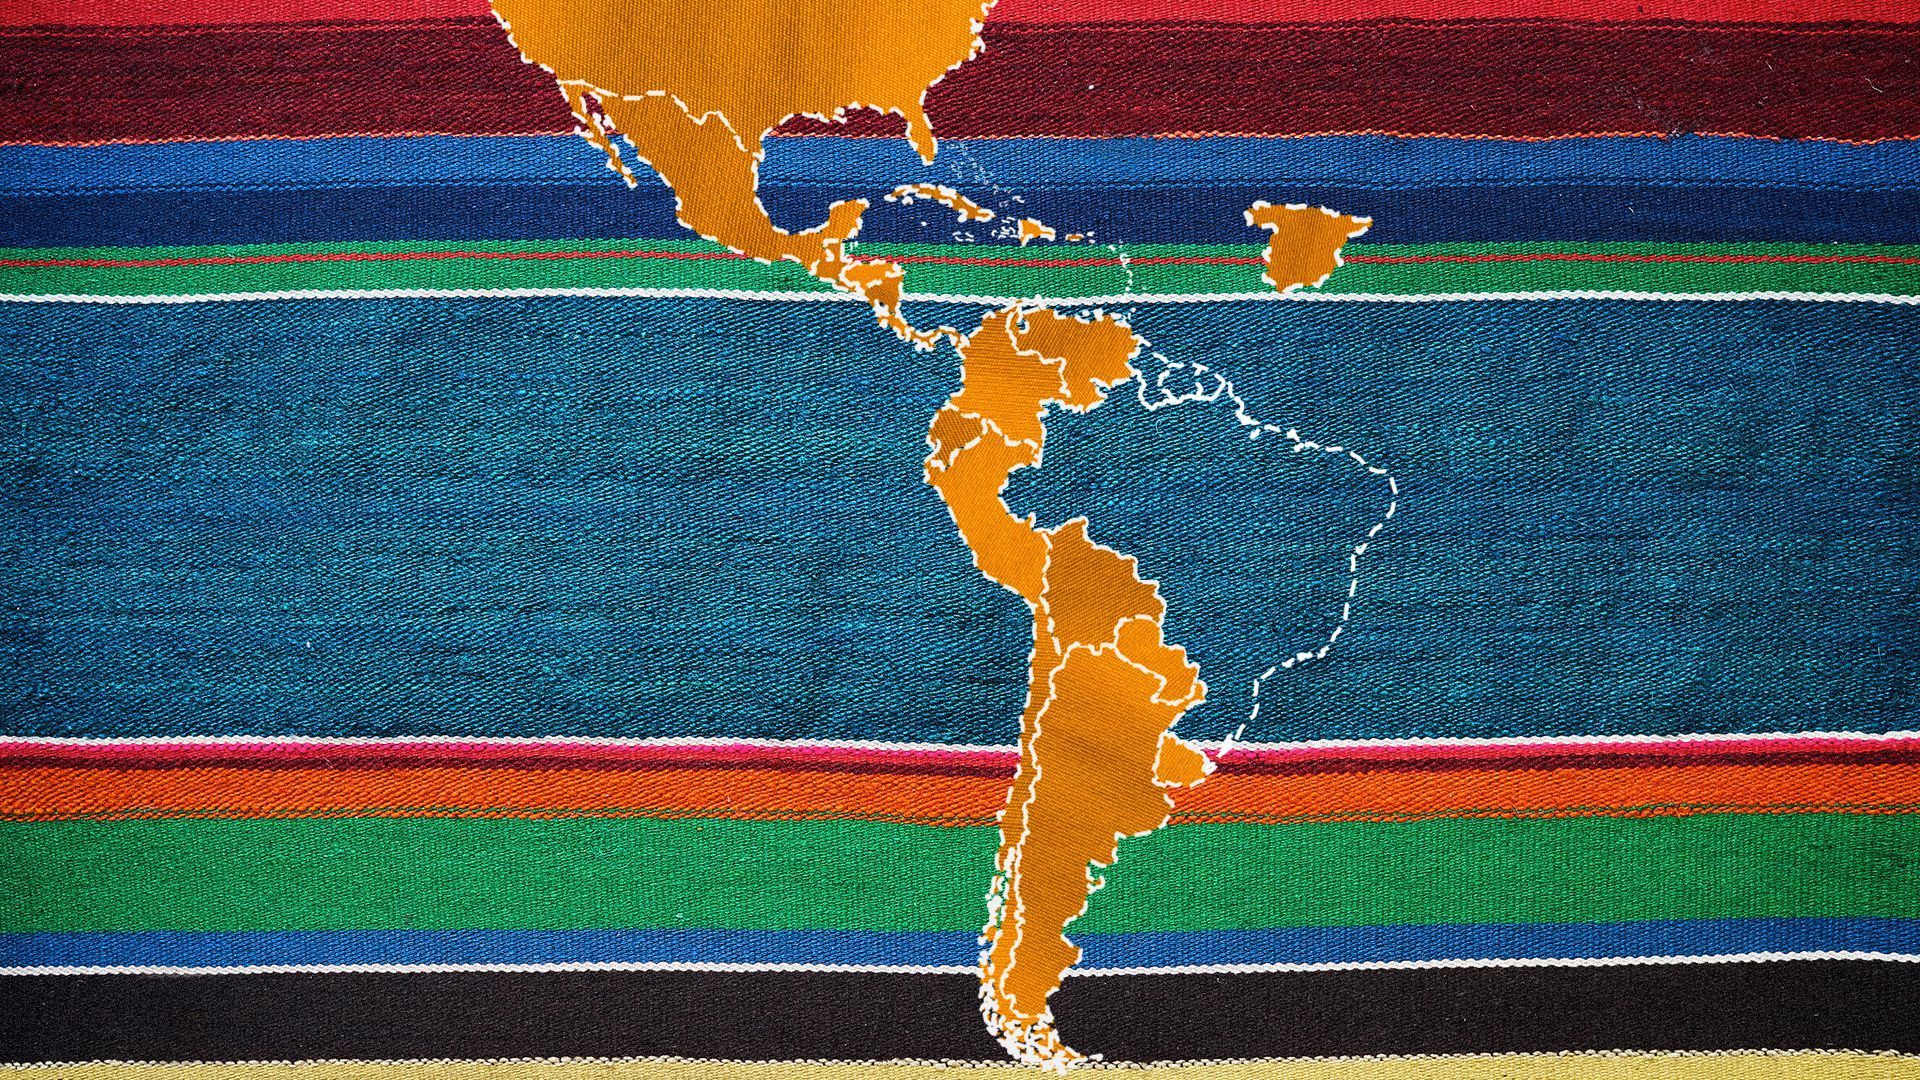 Illustration of a map of Hispanic countries sewn onto colorful fabric.